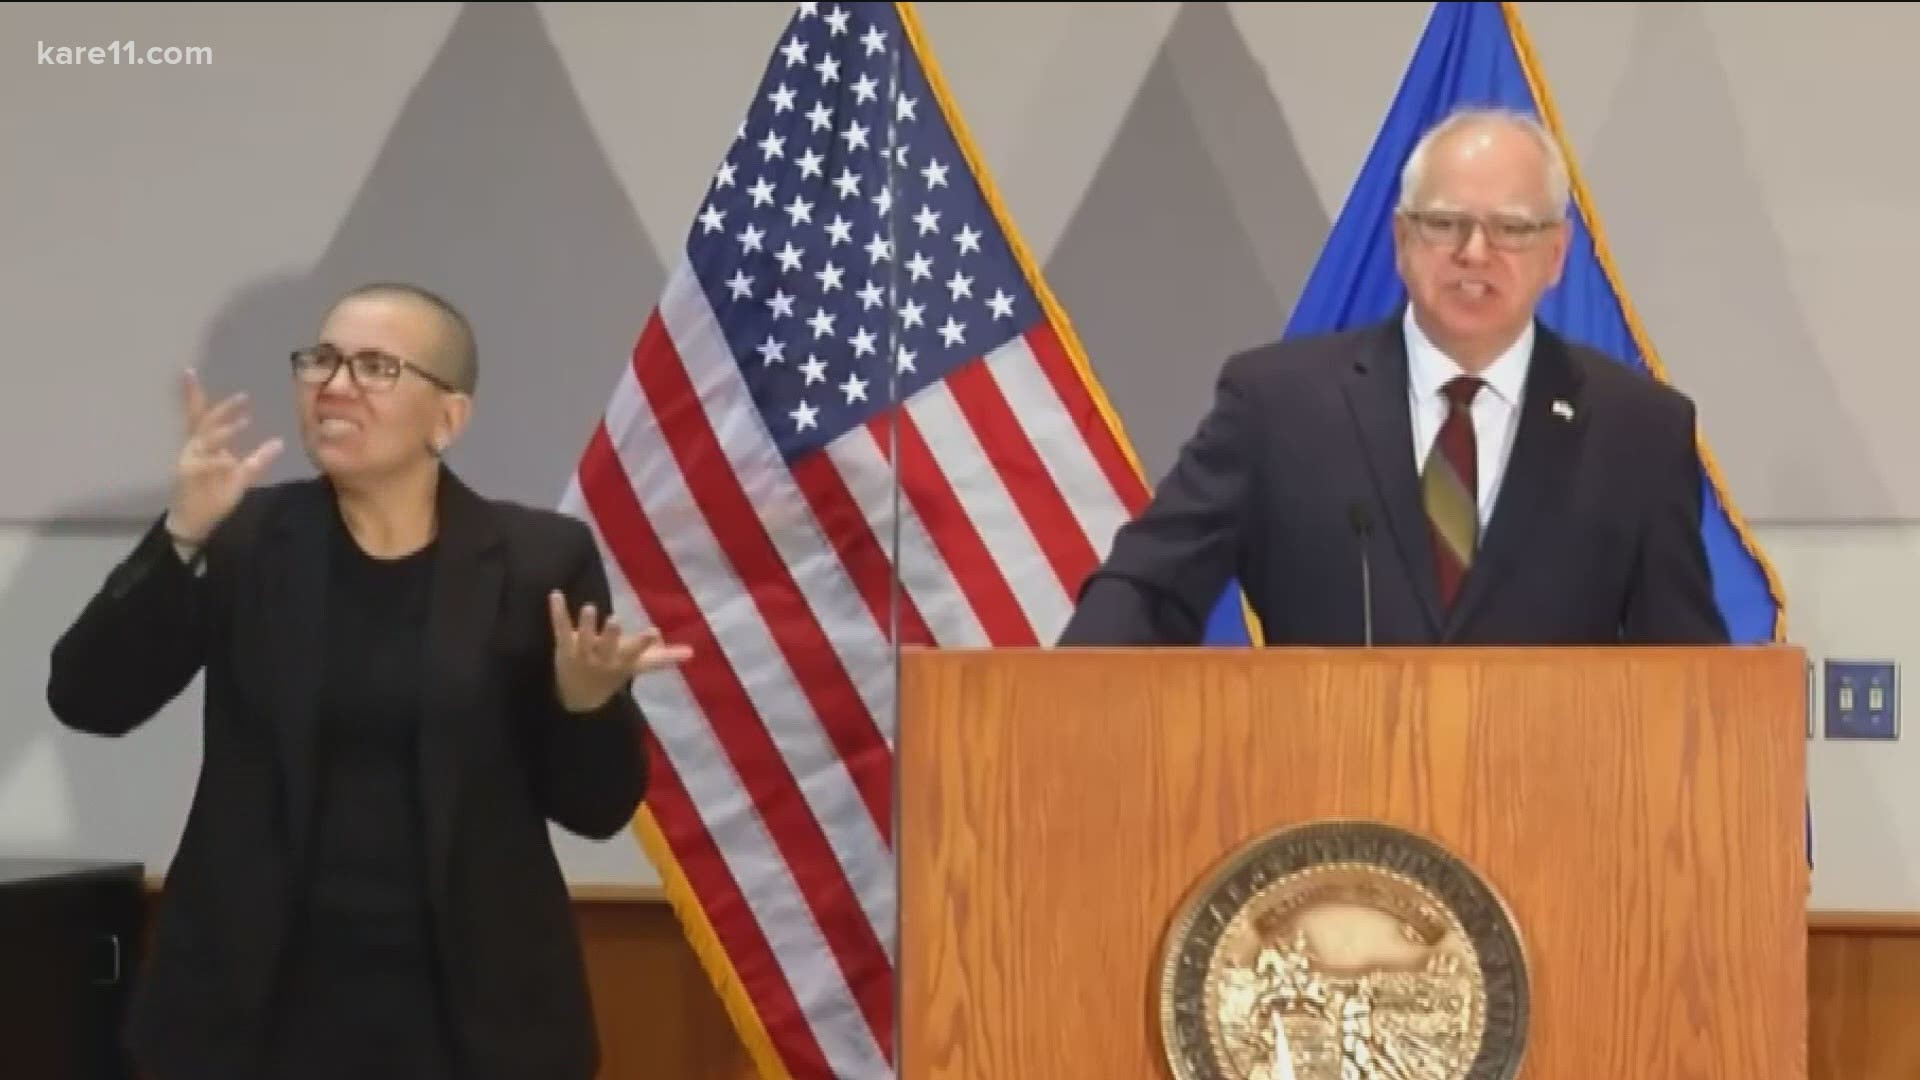 Gov. Walz said the federal government has "botched" the rollout, with the latest news about the lack of a promised stockpile.